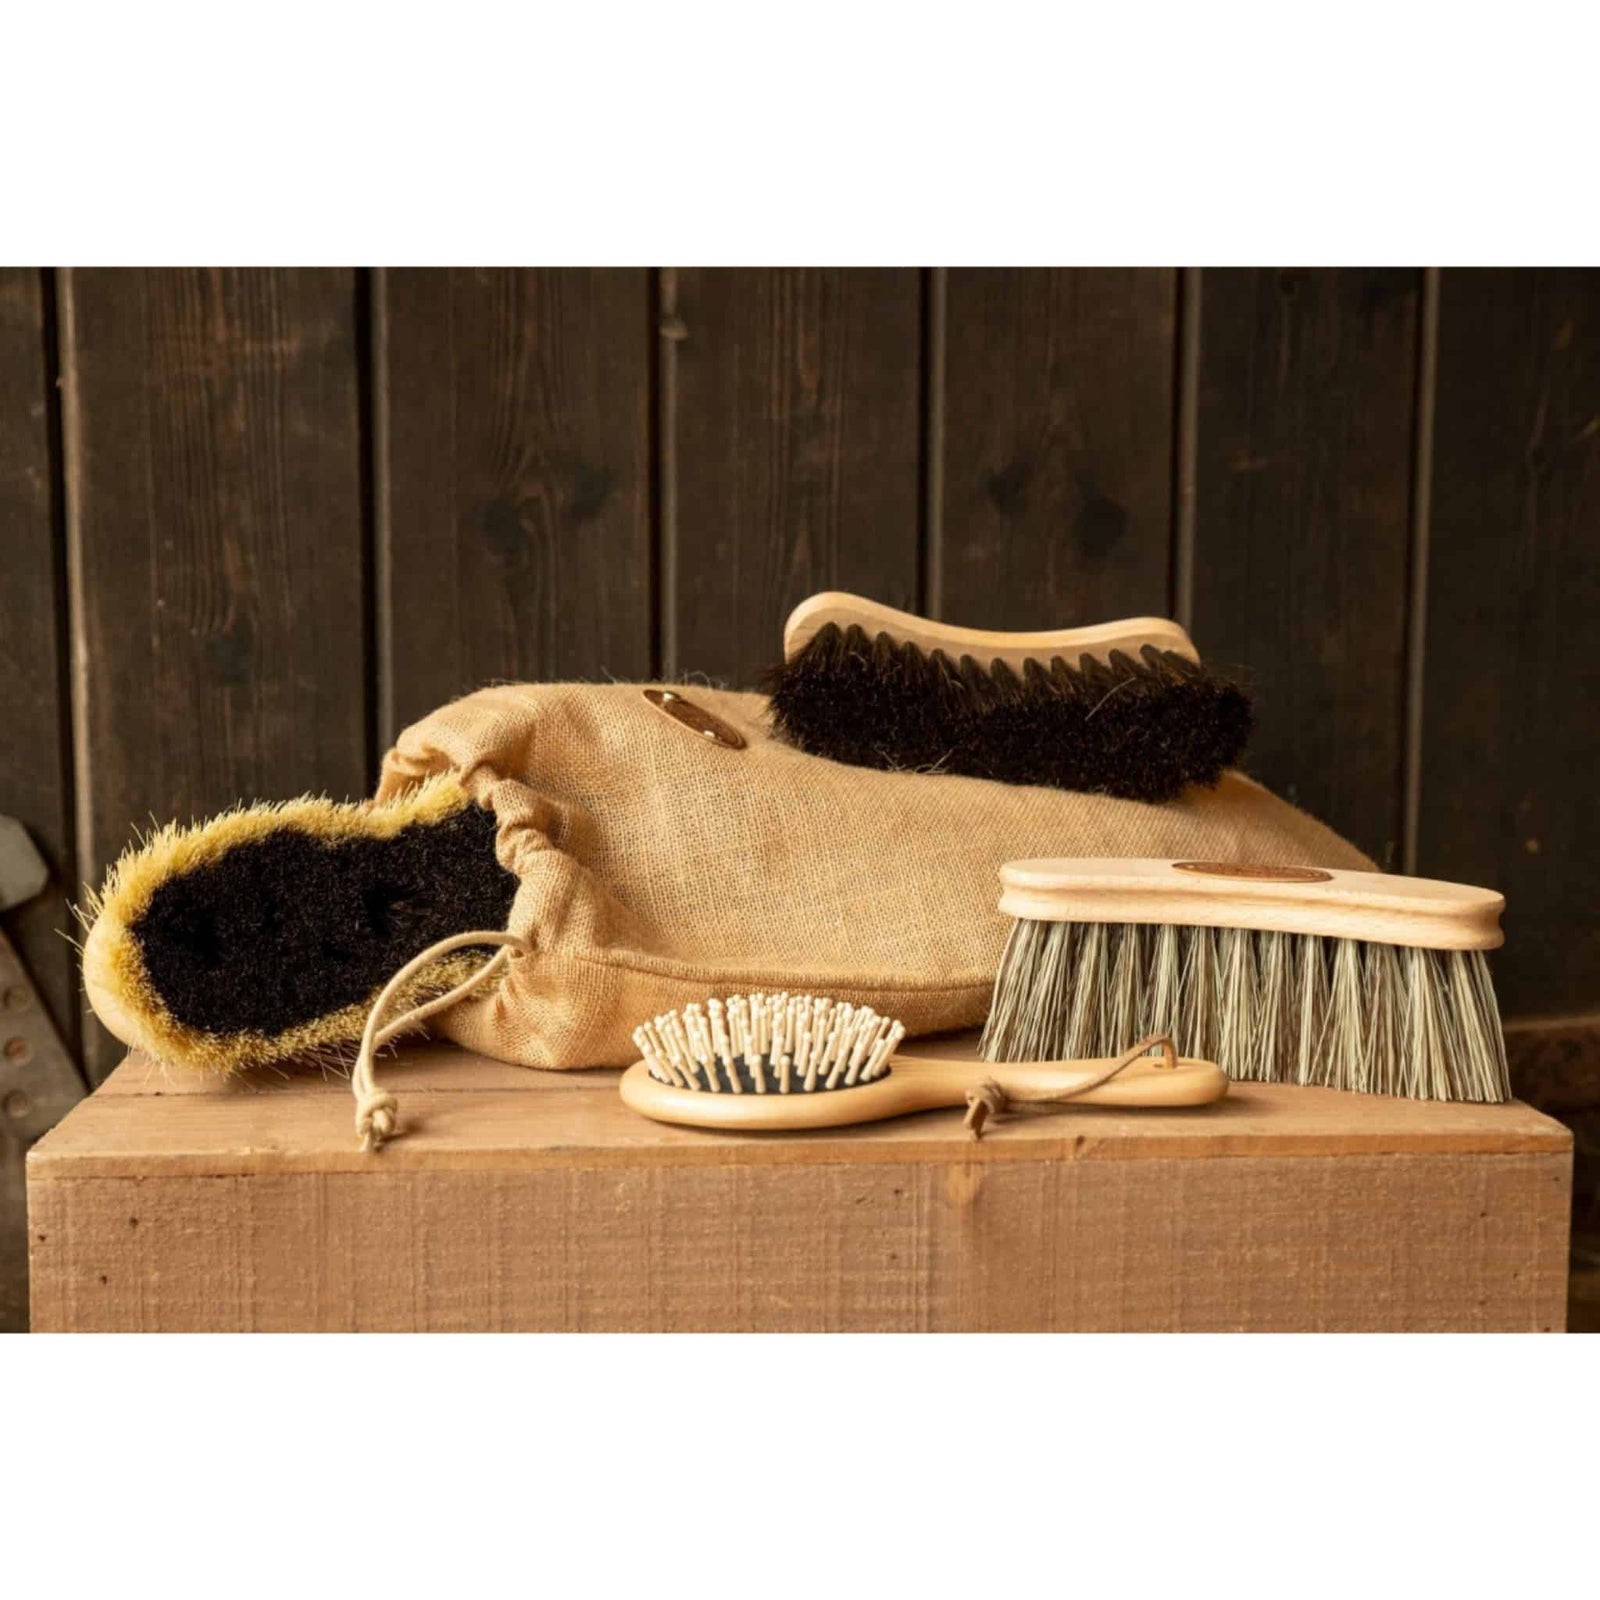 Elico Expanding Horse Sponges - Grooming Equipment - Stable & Yard